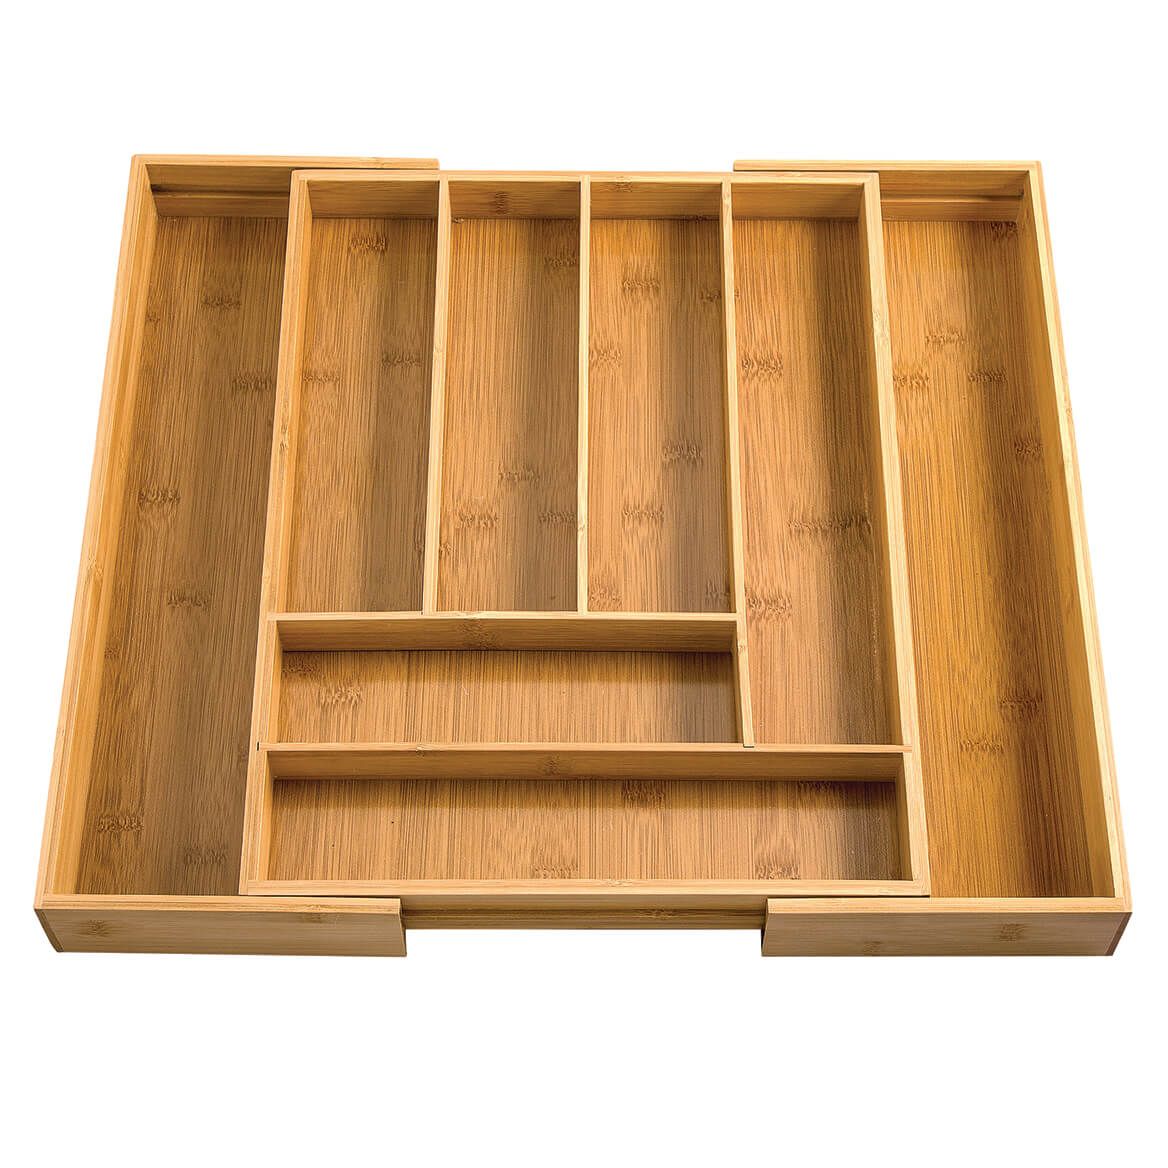 Bamboo Expandable Cutlery Drawer Organizer by HMP + '-' + 368380